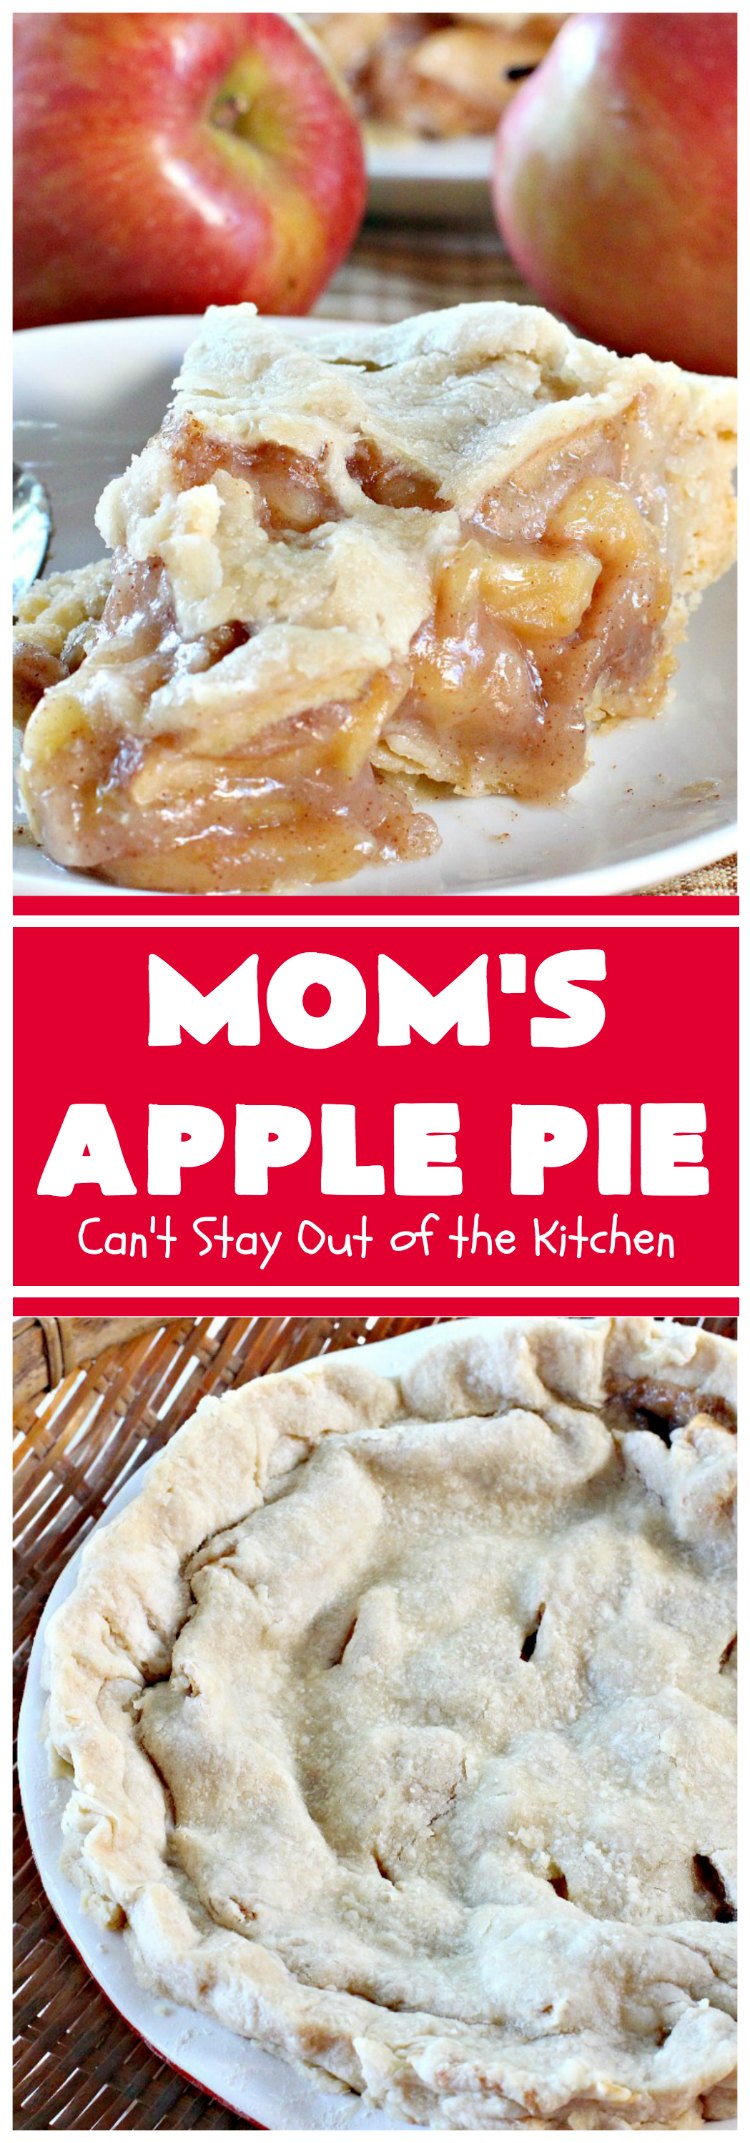 Mom's Apple Pie | Can't Stay Out of the Kitchen